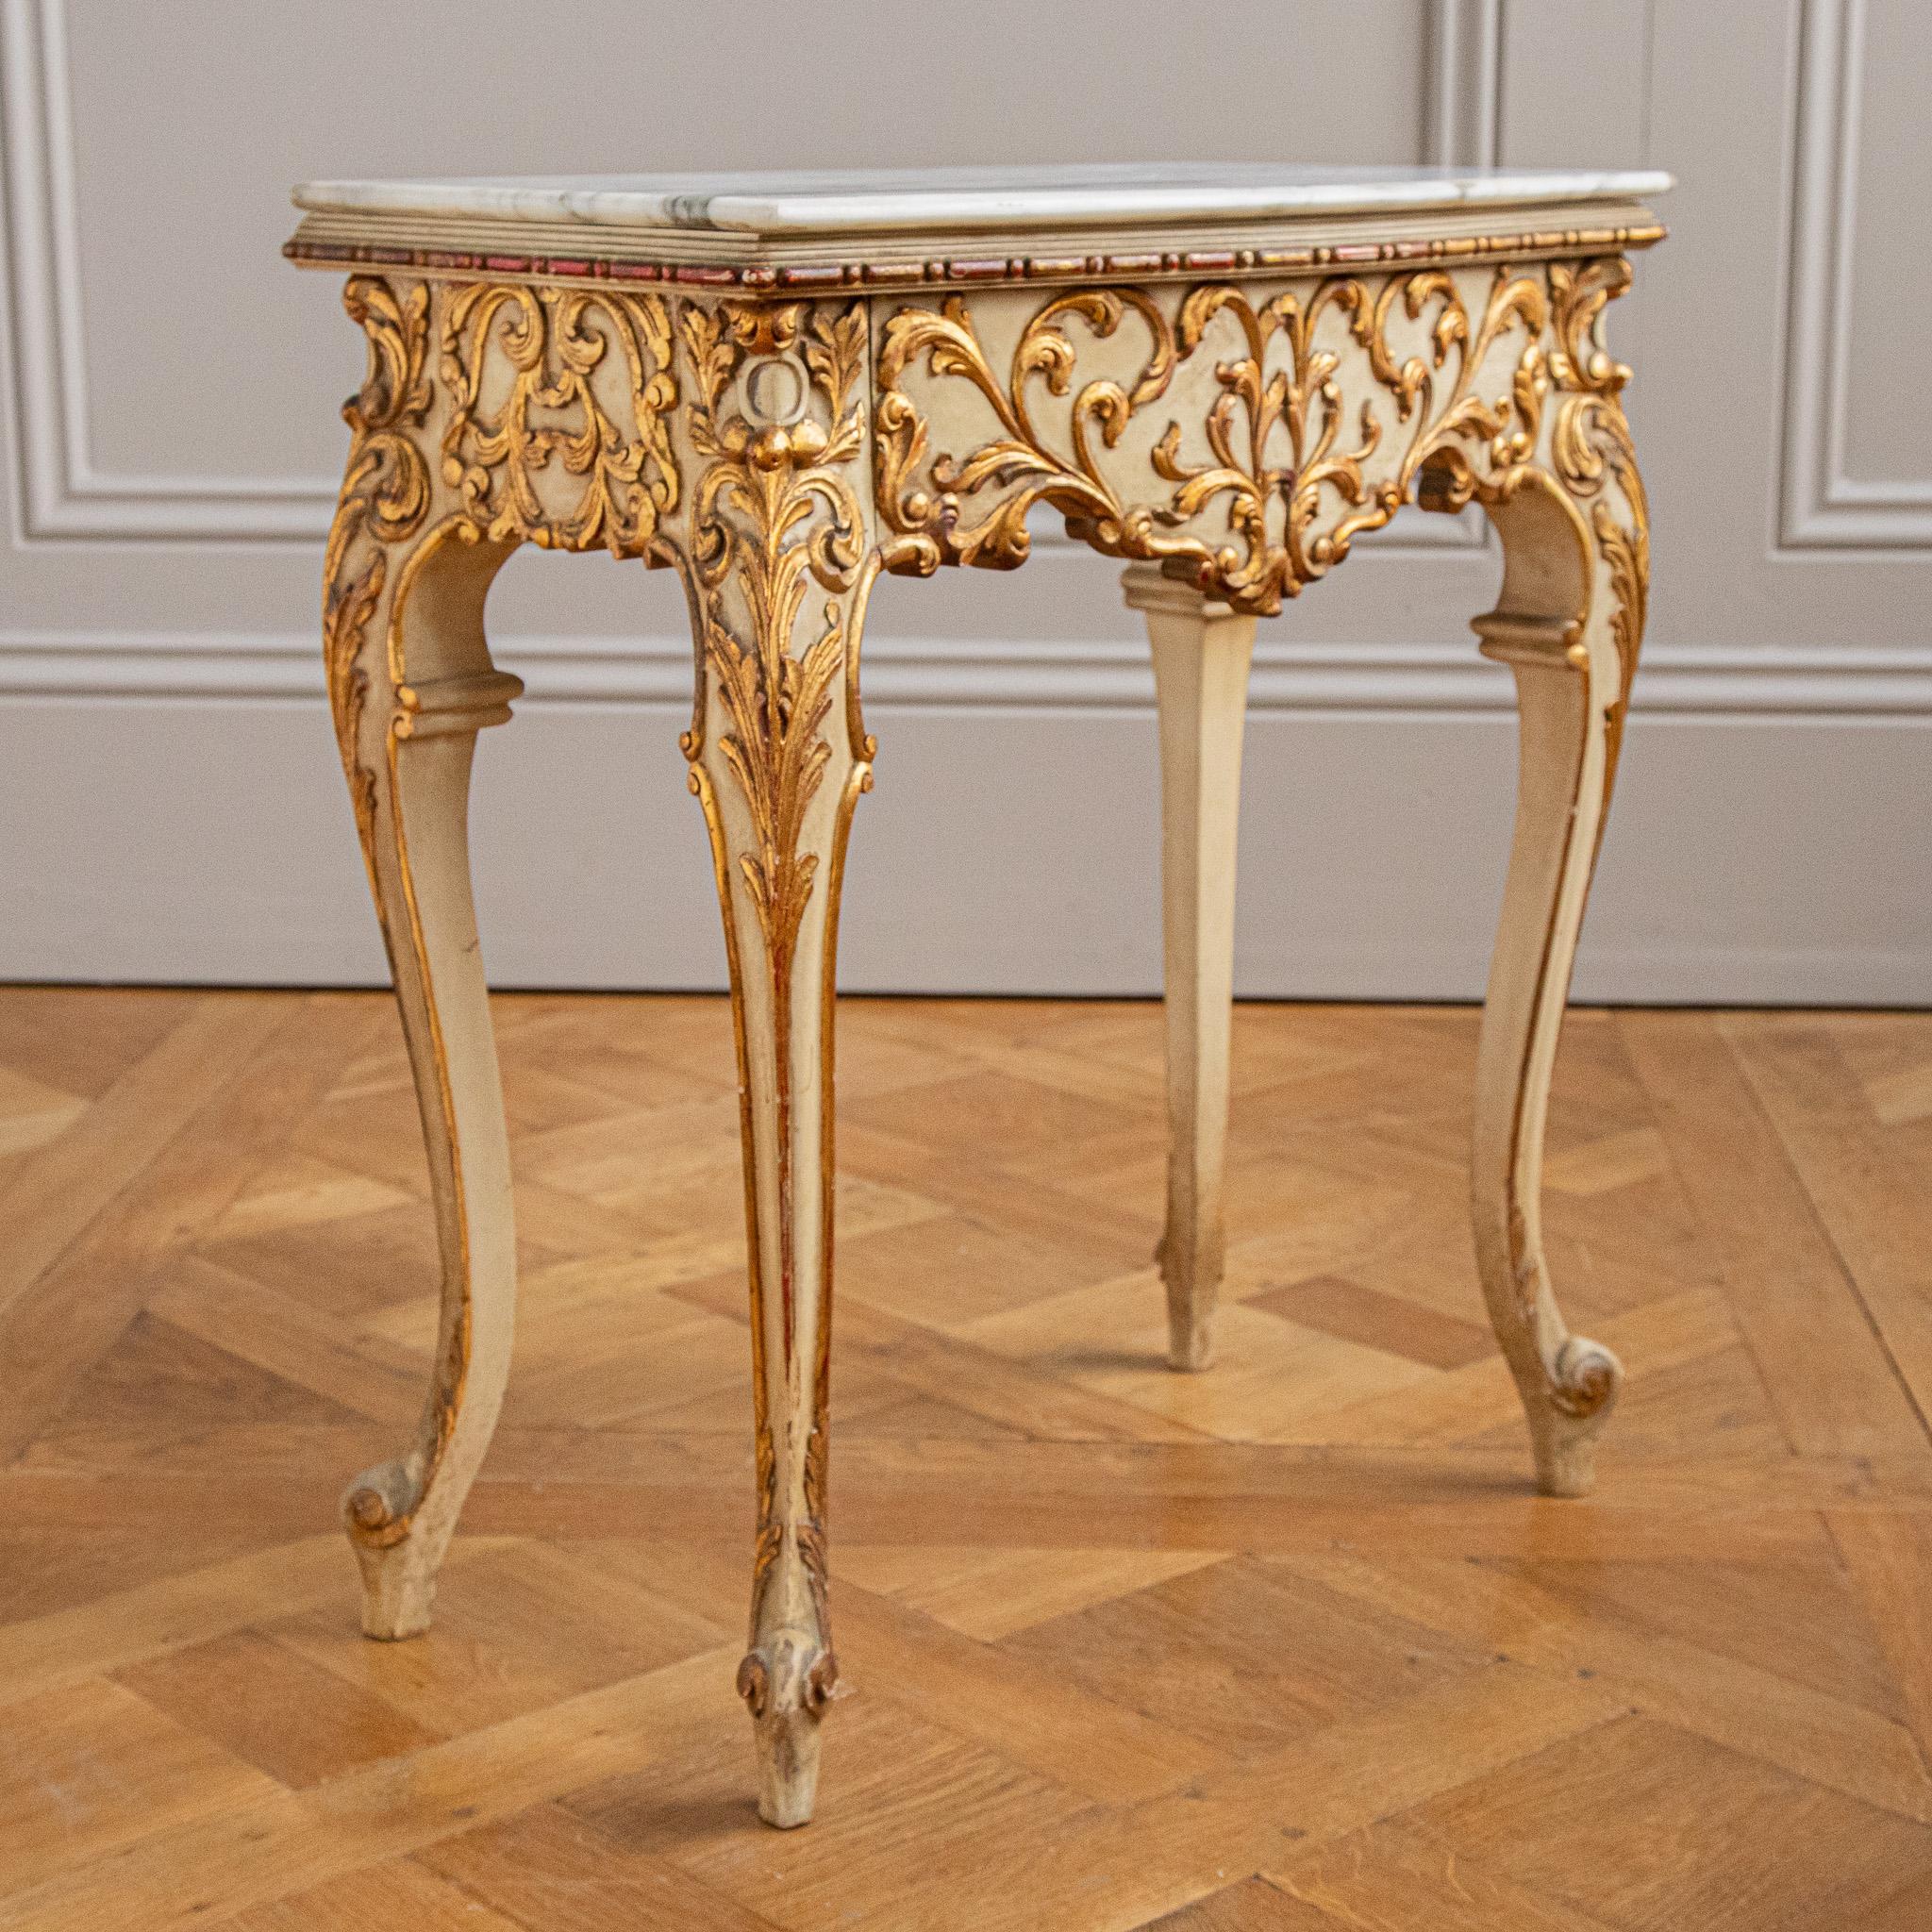 Early 1900's Venetian Style Painted with Giltwood Bedside Tables From Italy For Sale 3